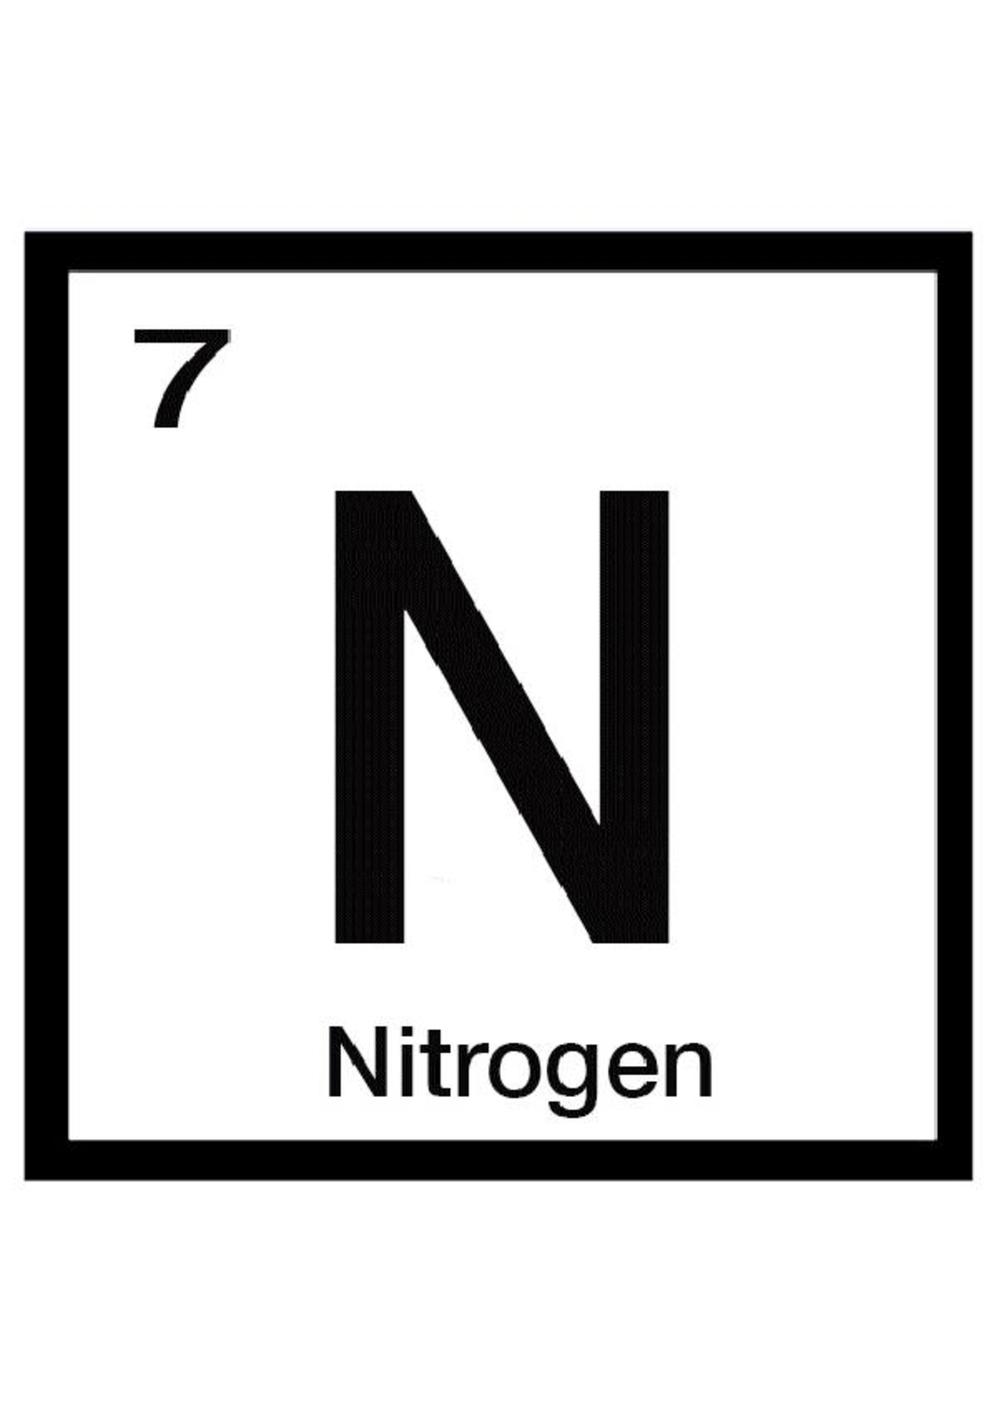 Certificate of Authenticity and Consignment - Nitrogen